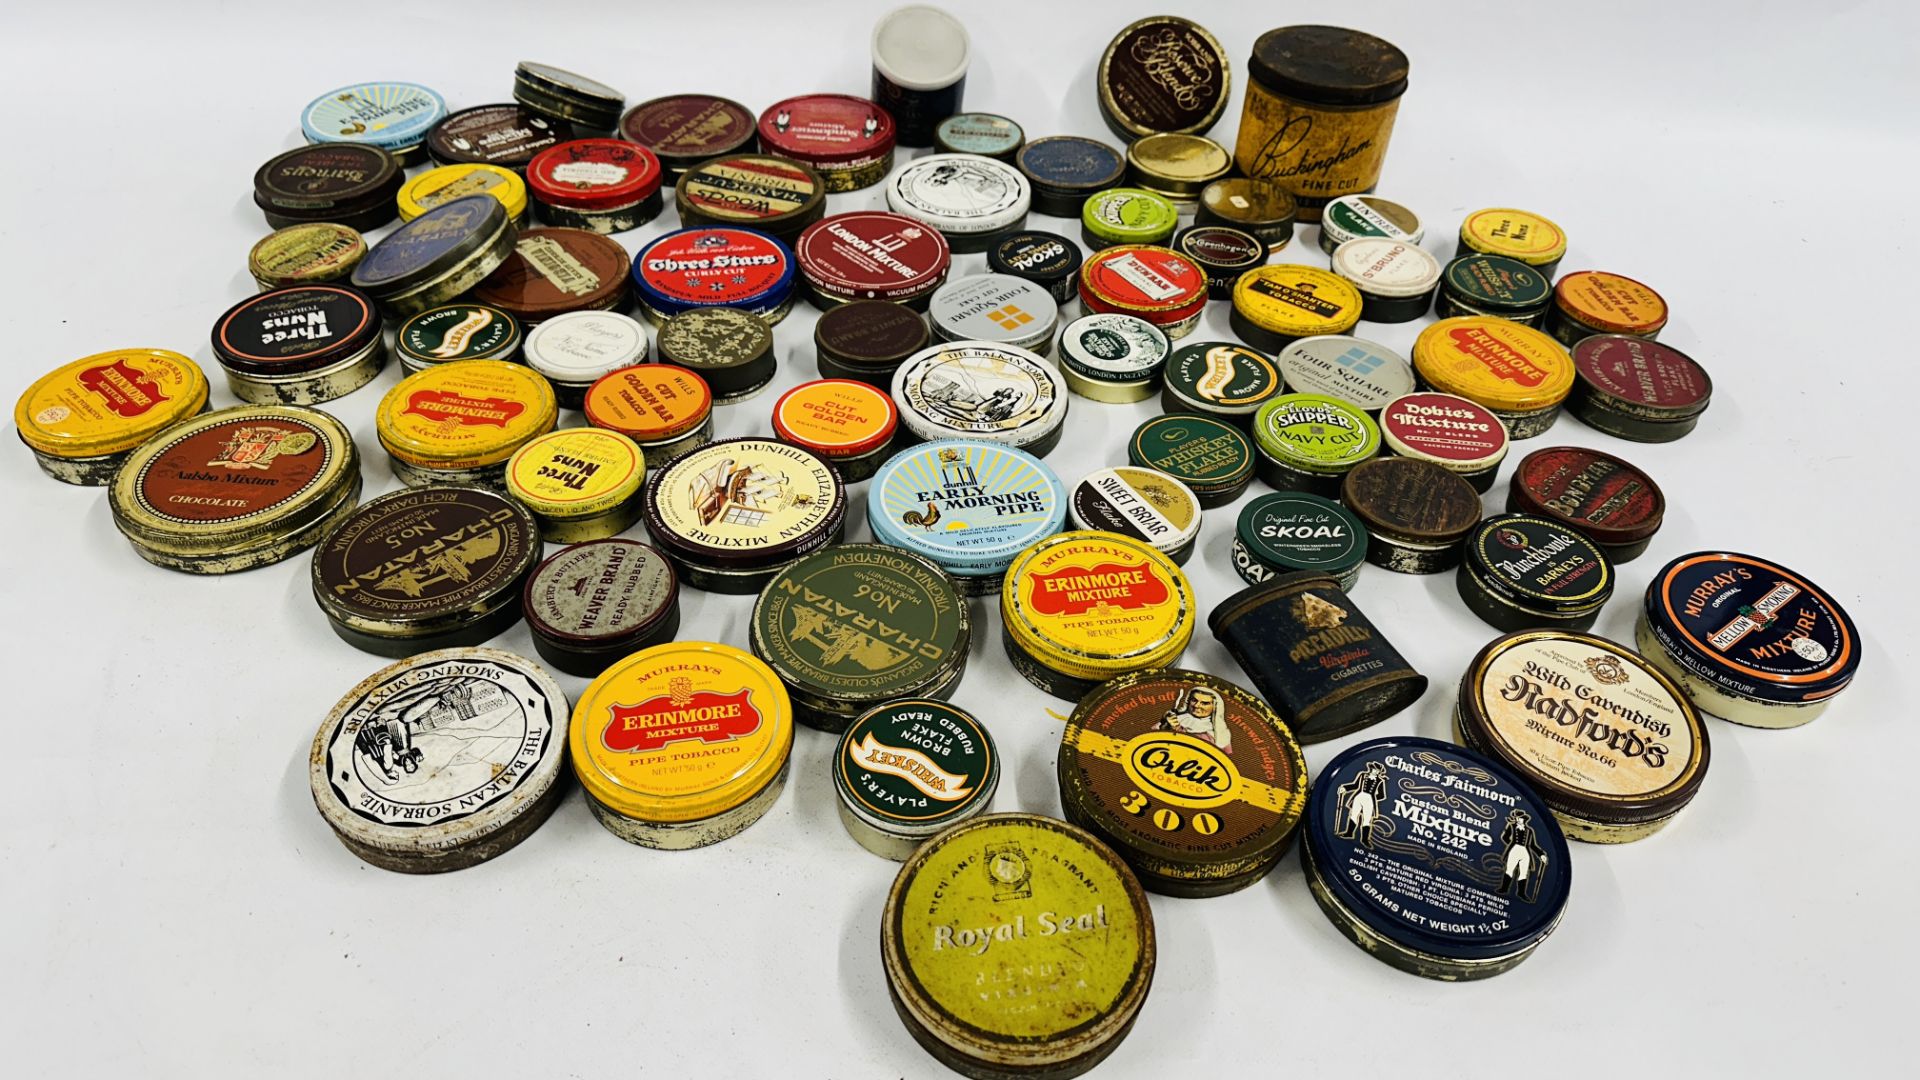 A BOX CONTAINING AN EXTENSIVE COLLECTION OF ASSORTED EMPTY VINTAGE ROUND TOBACCO TINS TO INCLUDE